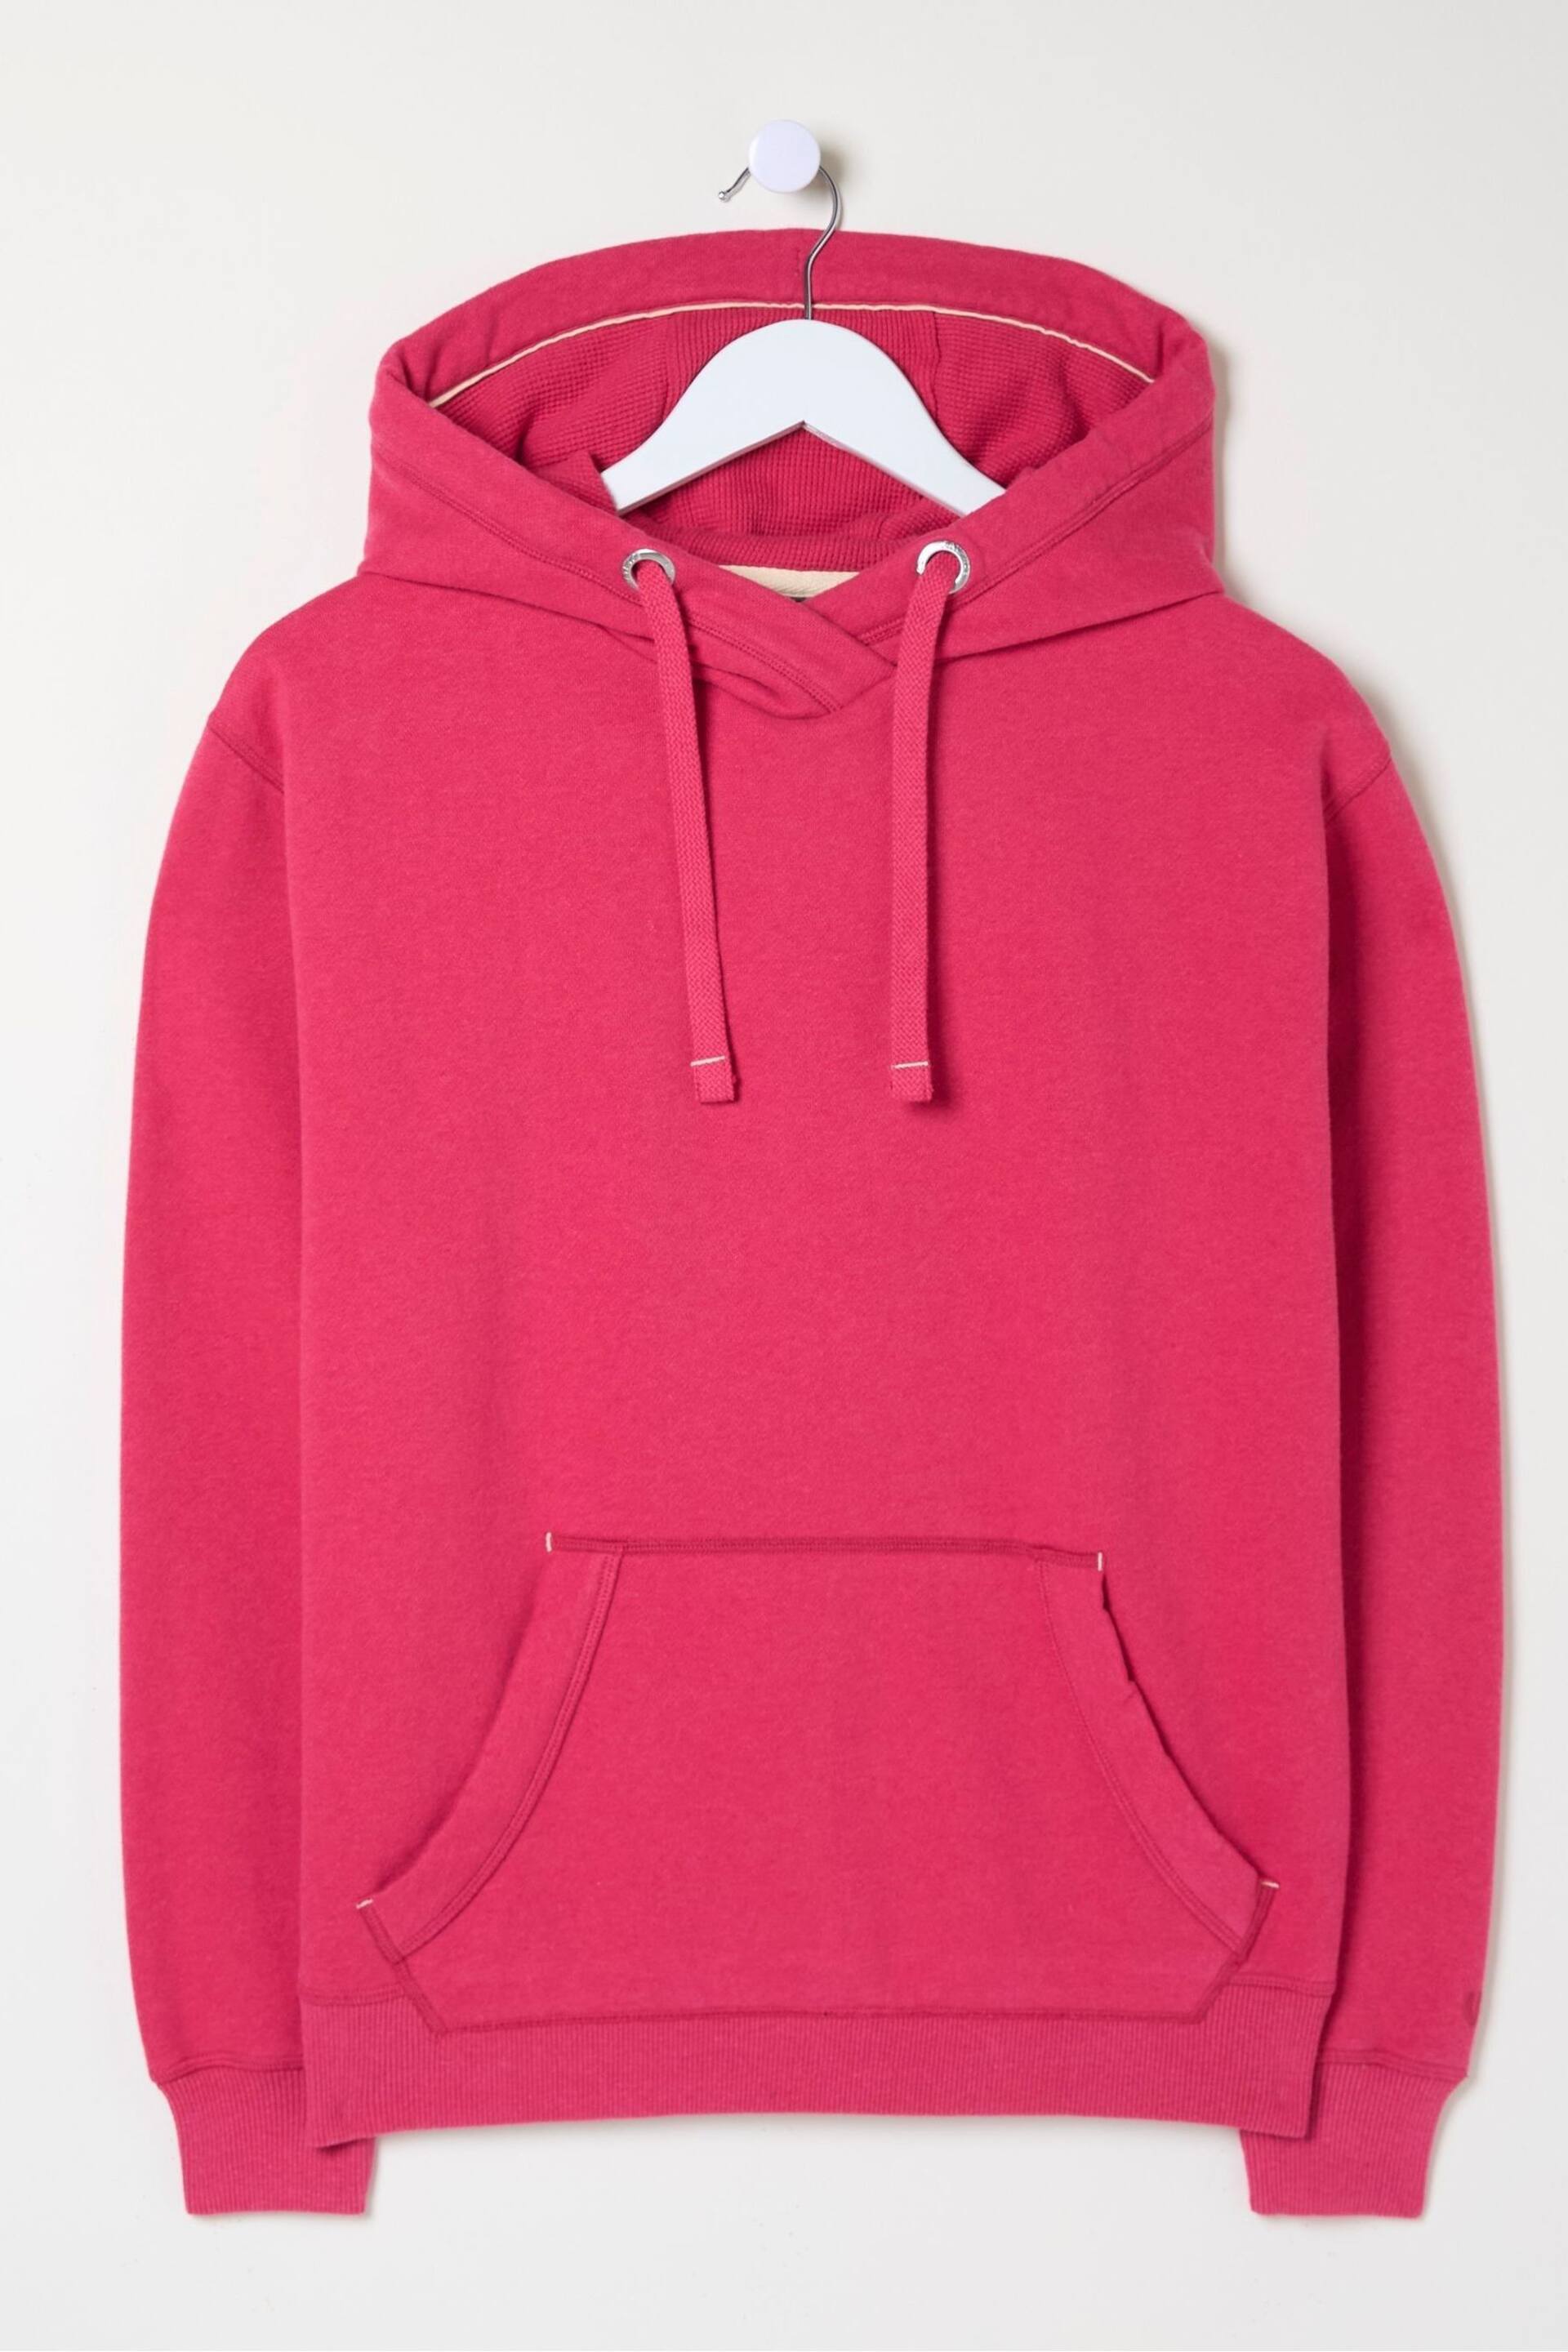 FatFace Pink Izzy Overhead Hoodie - Image 5 of 5